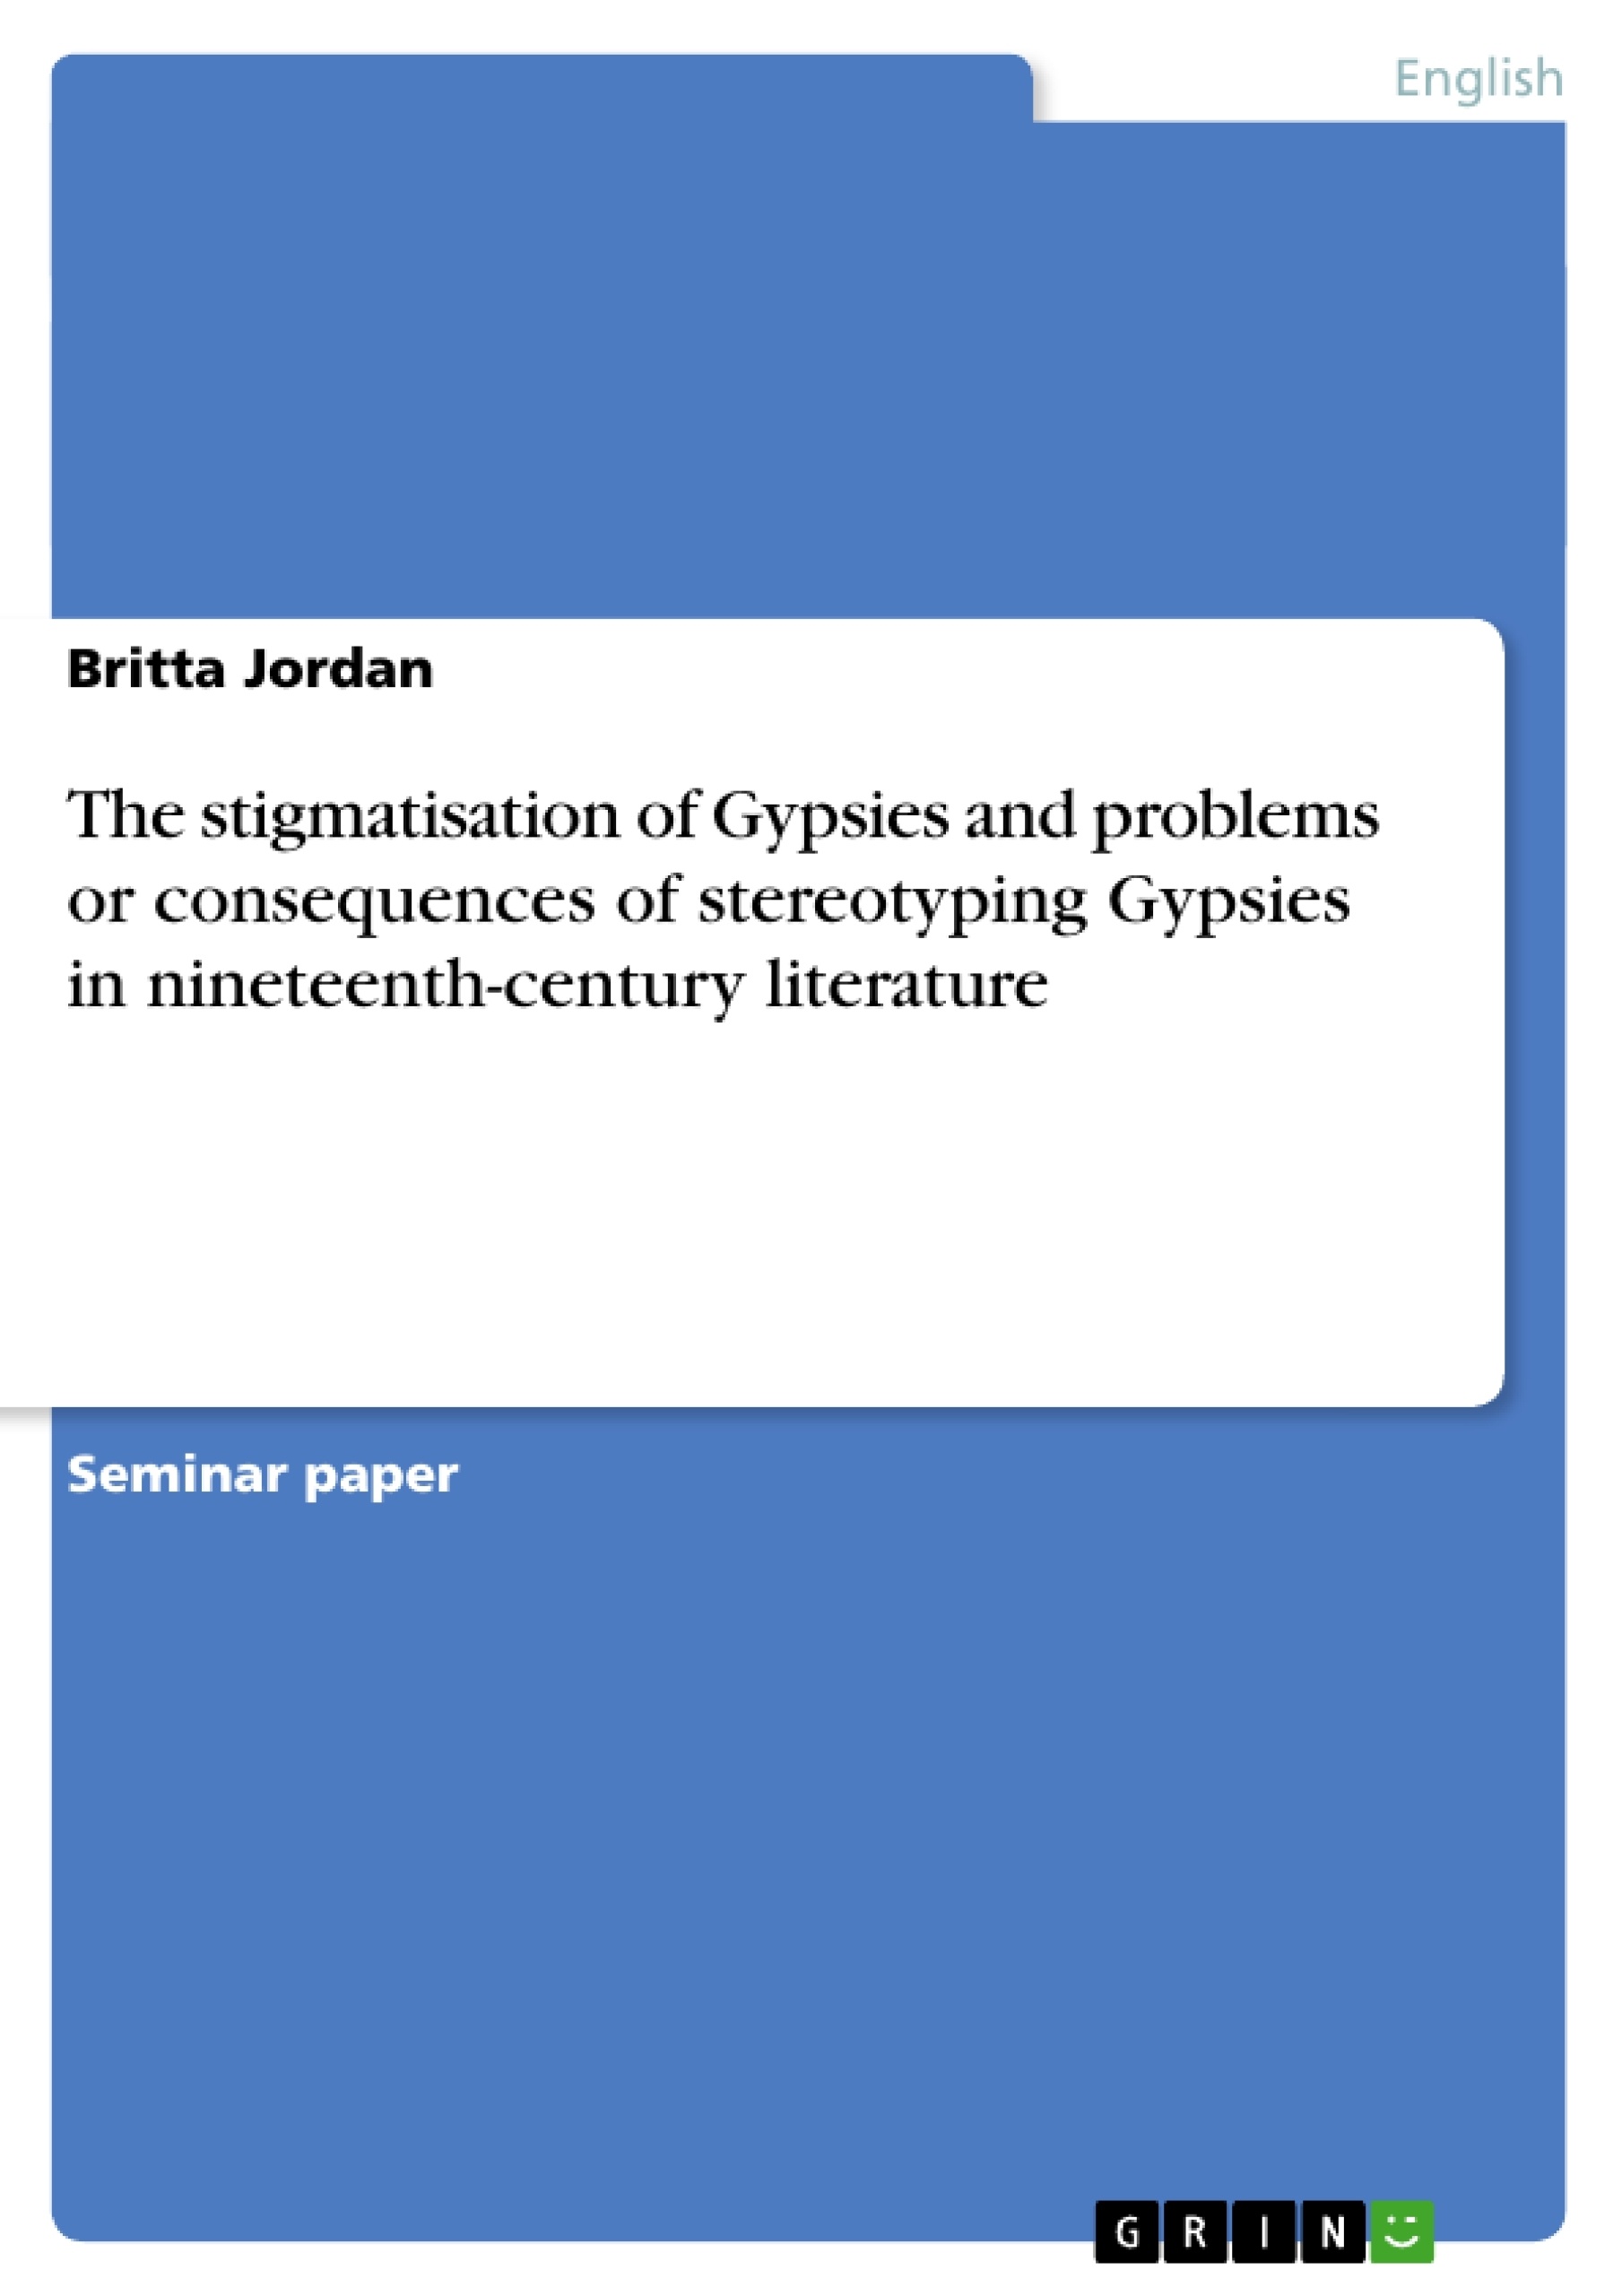 Titre: The stigmatisation of Gypsies and problems or consequences of stereotyping Gypsies in nineteenth-century literature